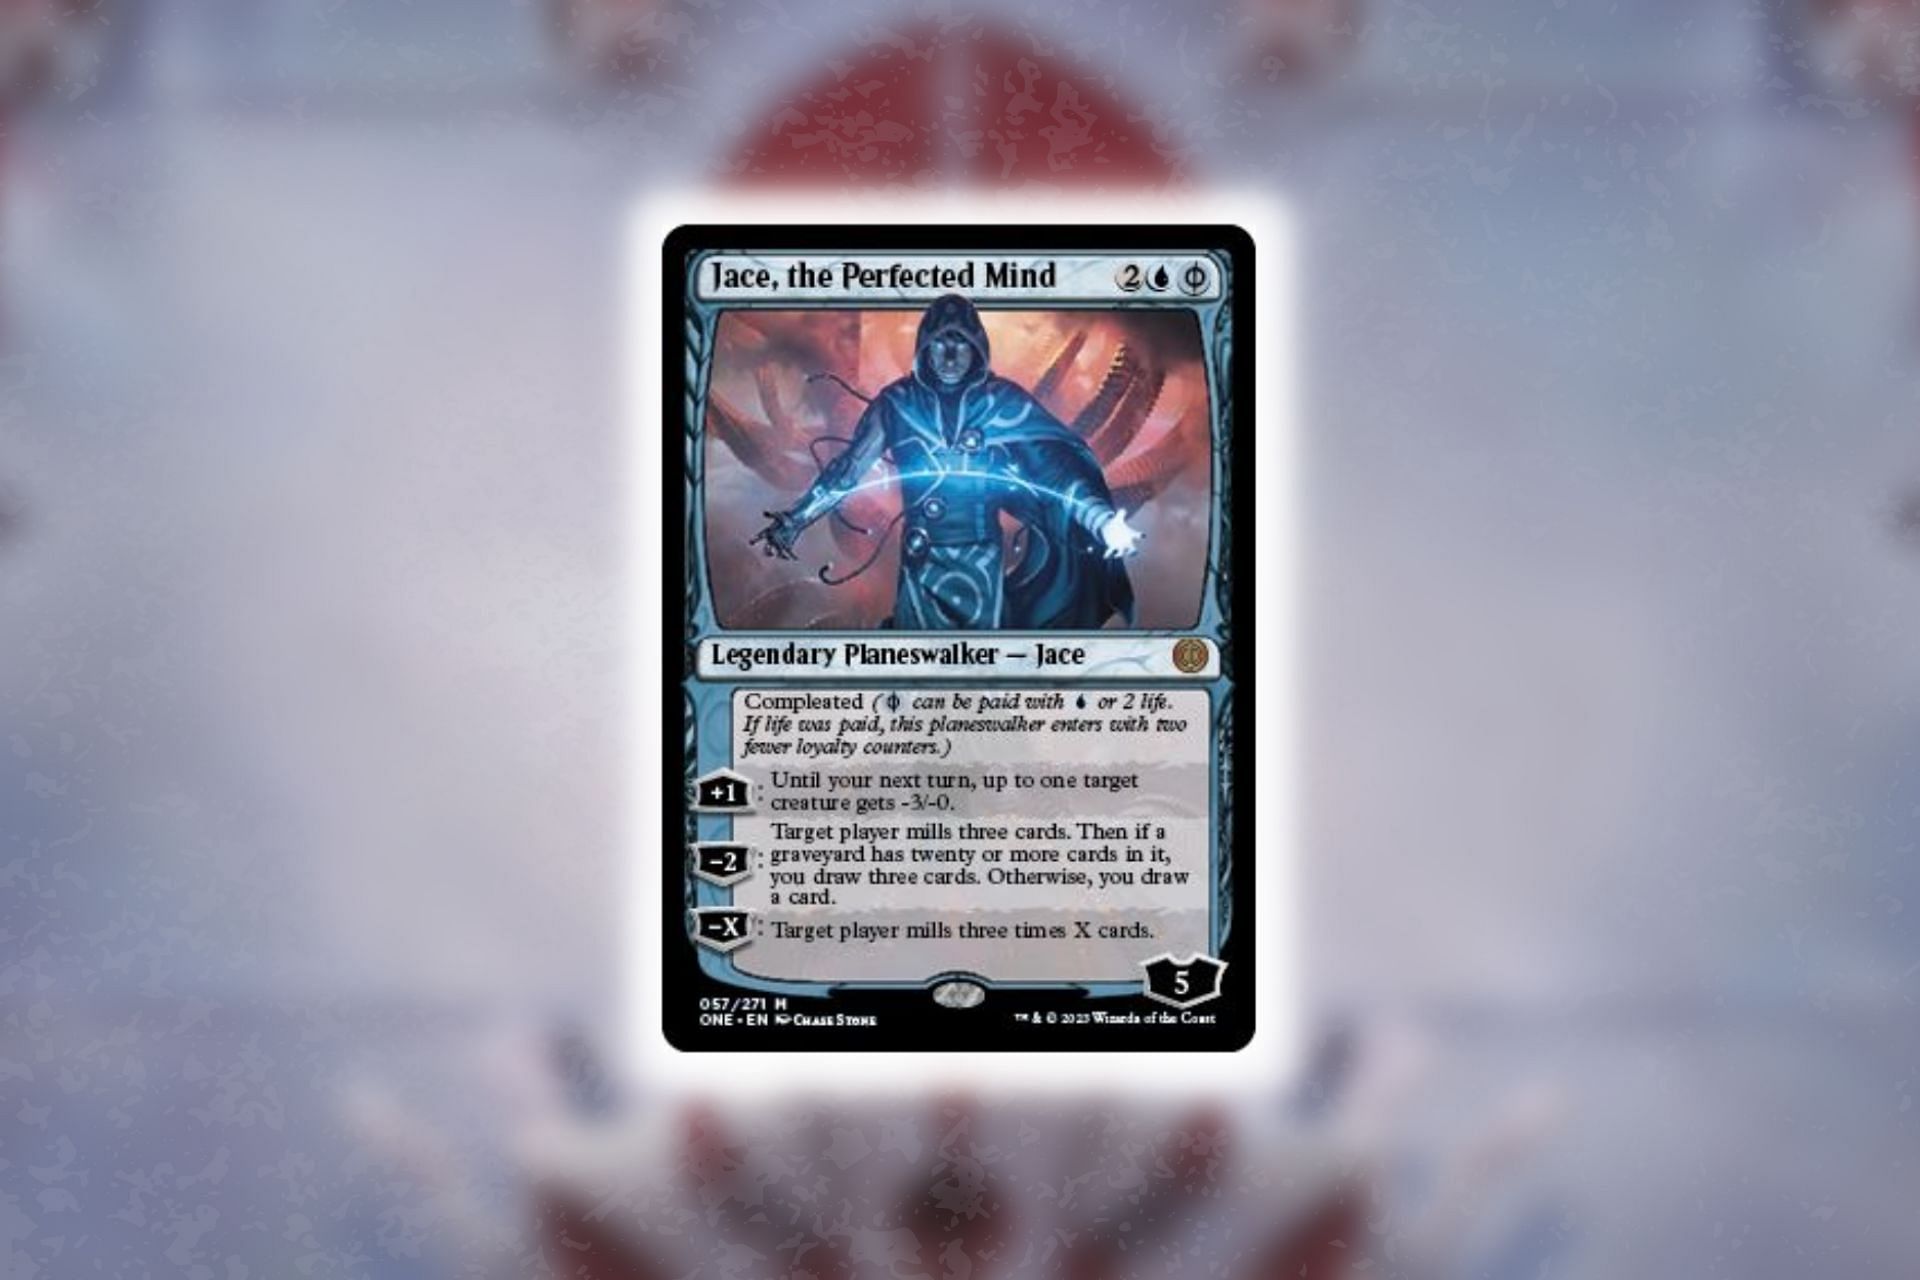 Jace the Mindsculptor has become Jace the Perfected Mind in Magic: The Gathering.